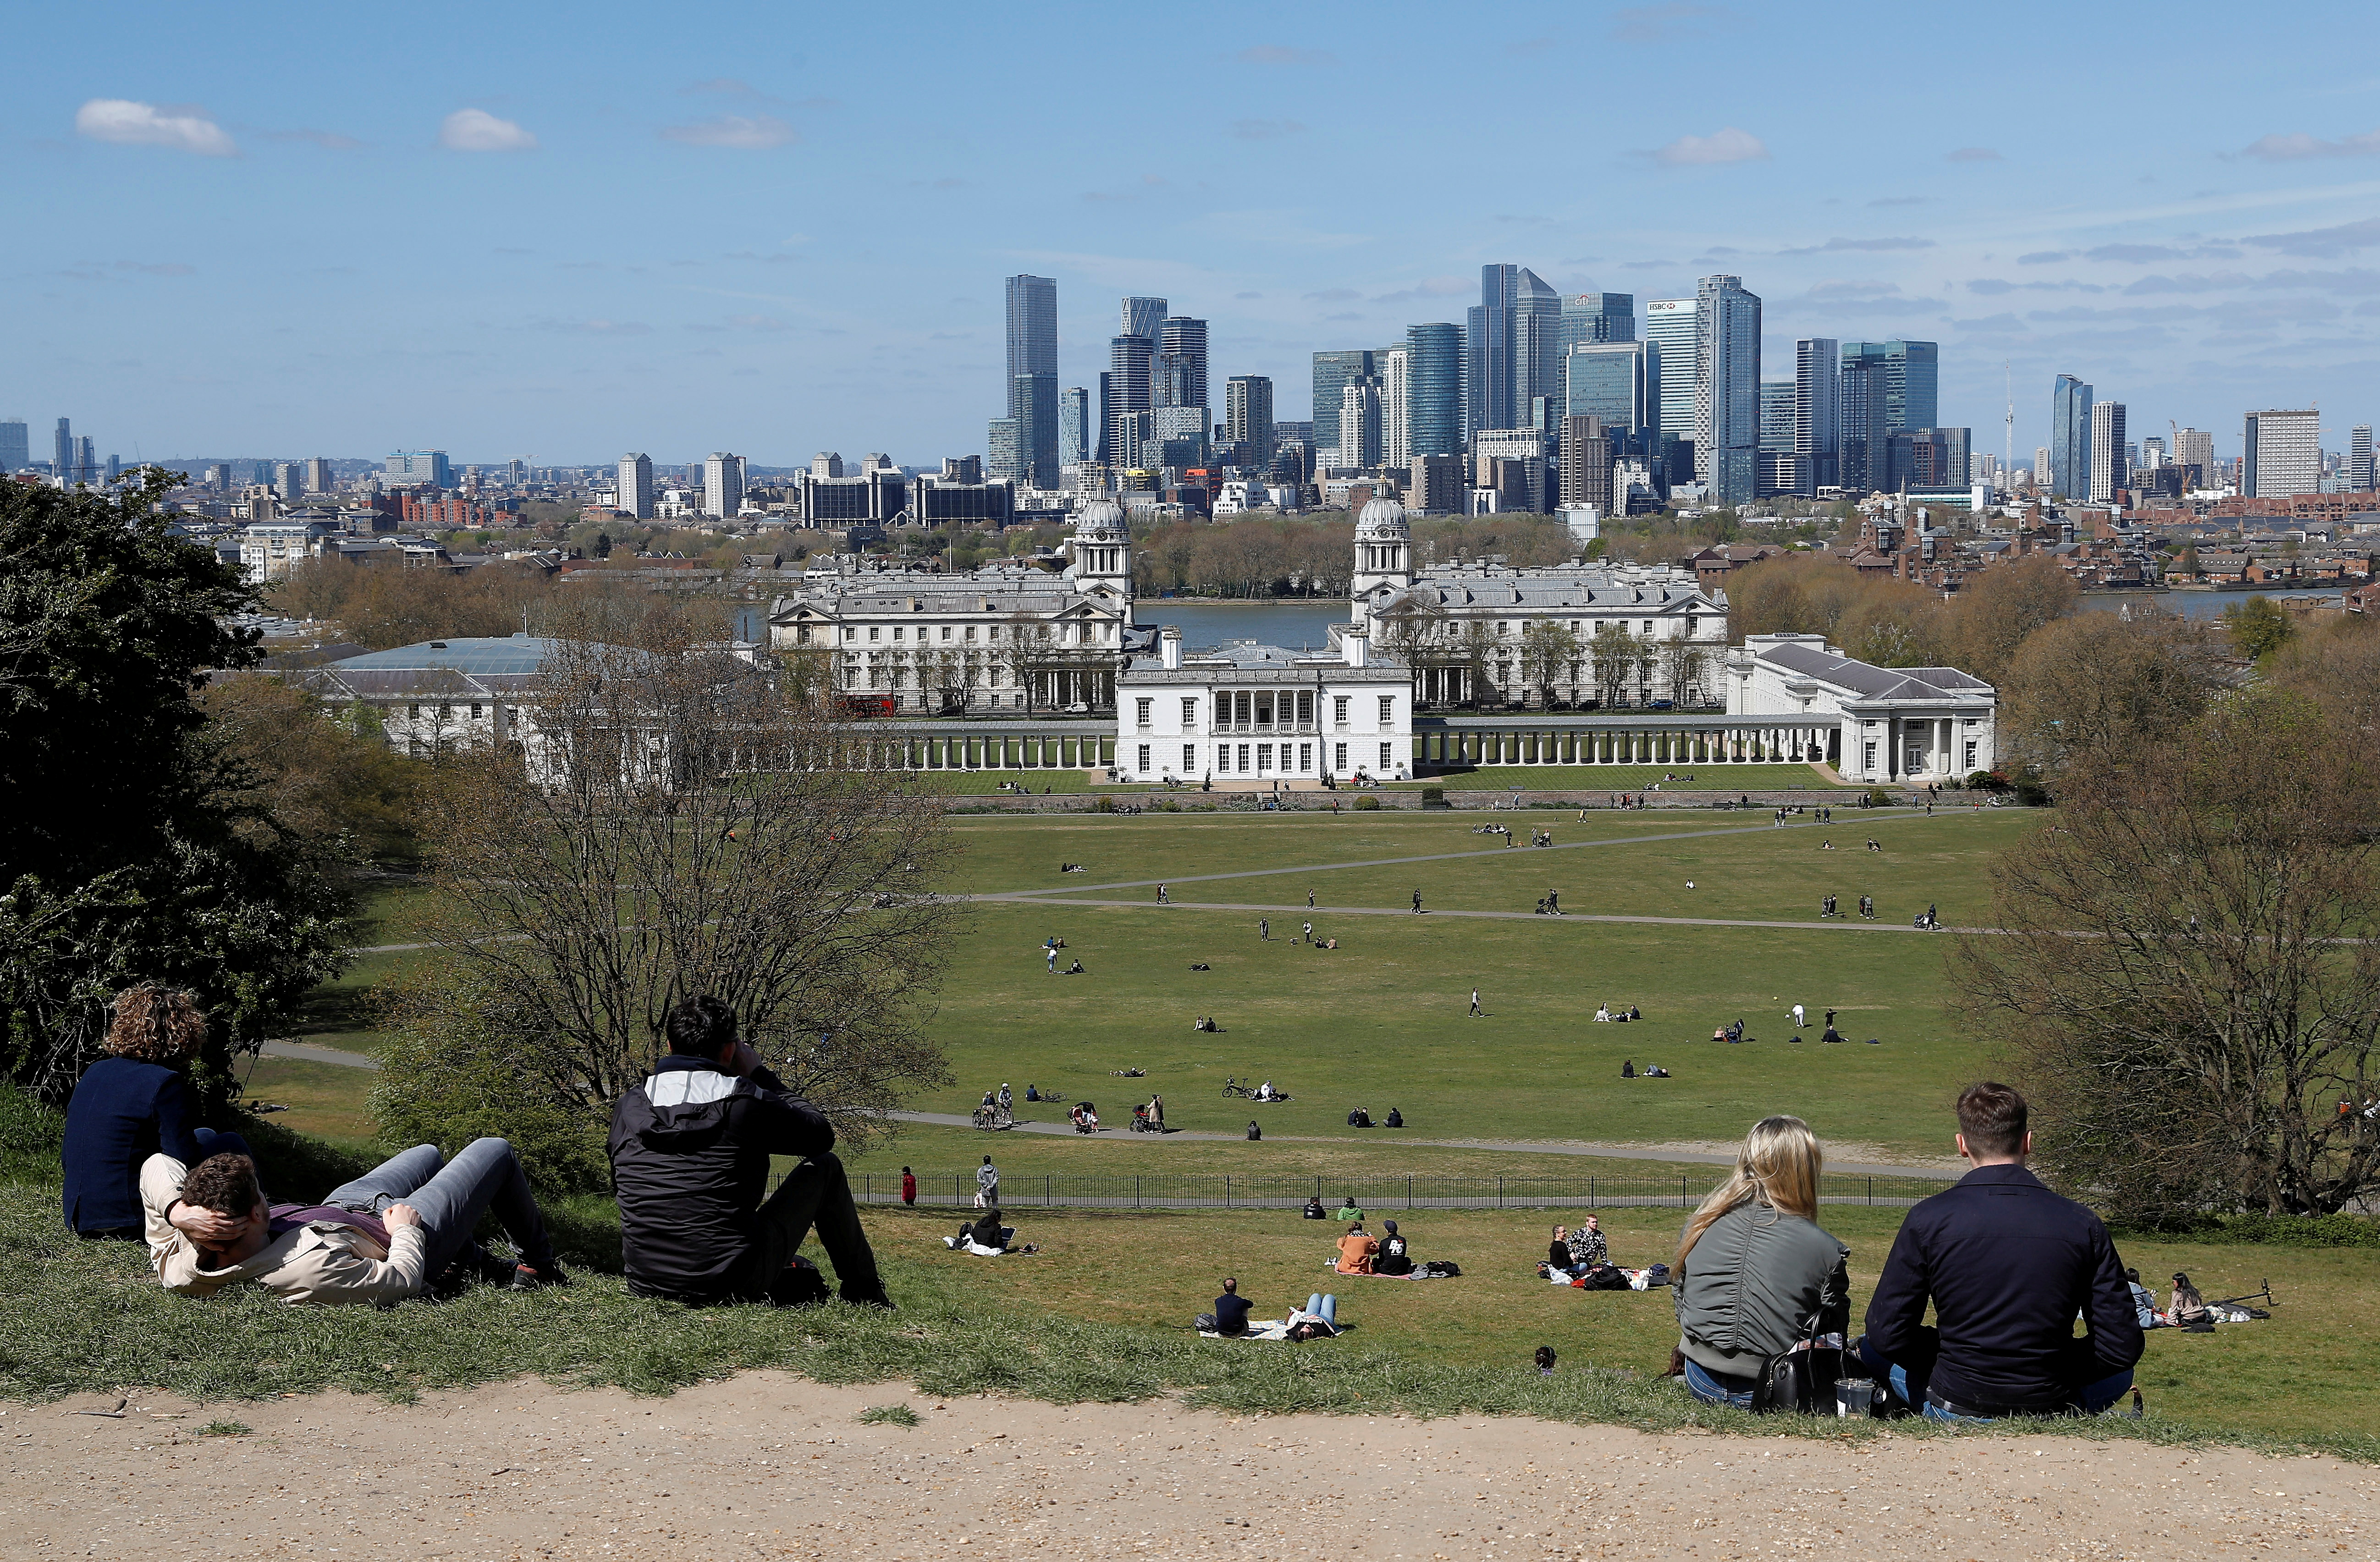 Visitors to Greenwich Park sit and look towards Canary Wharf financial district as lockdown restrictions are eased amidst the spread of the coronavirus disease (COVID-19) pandemic in London